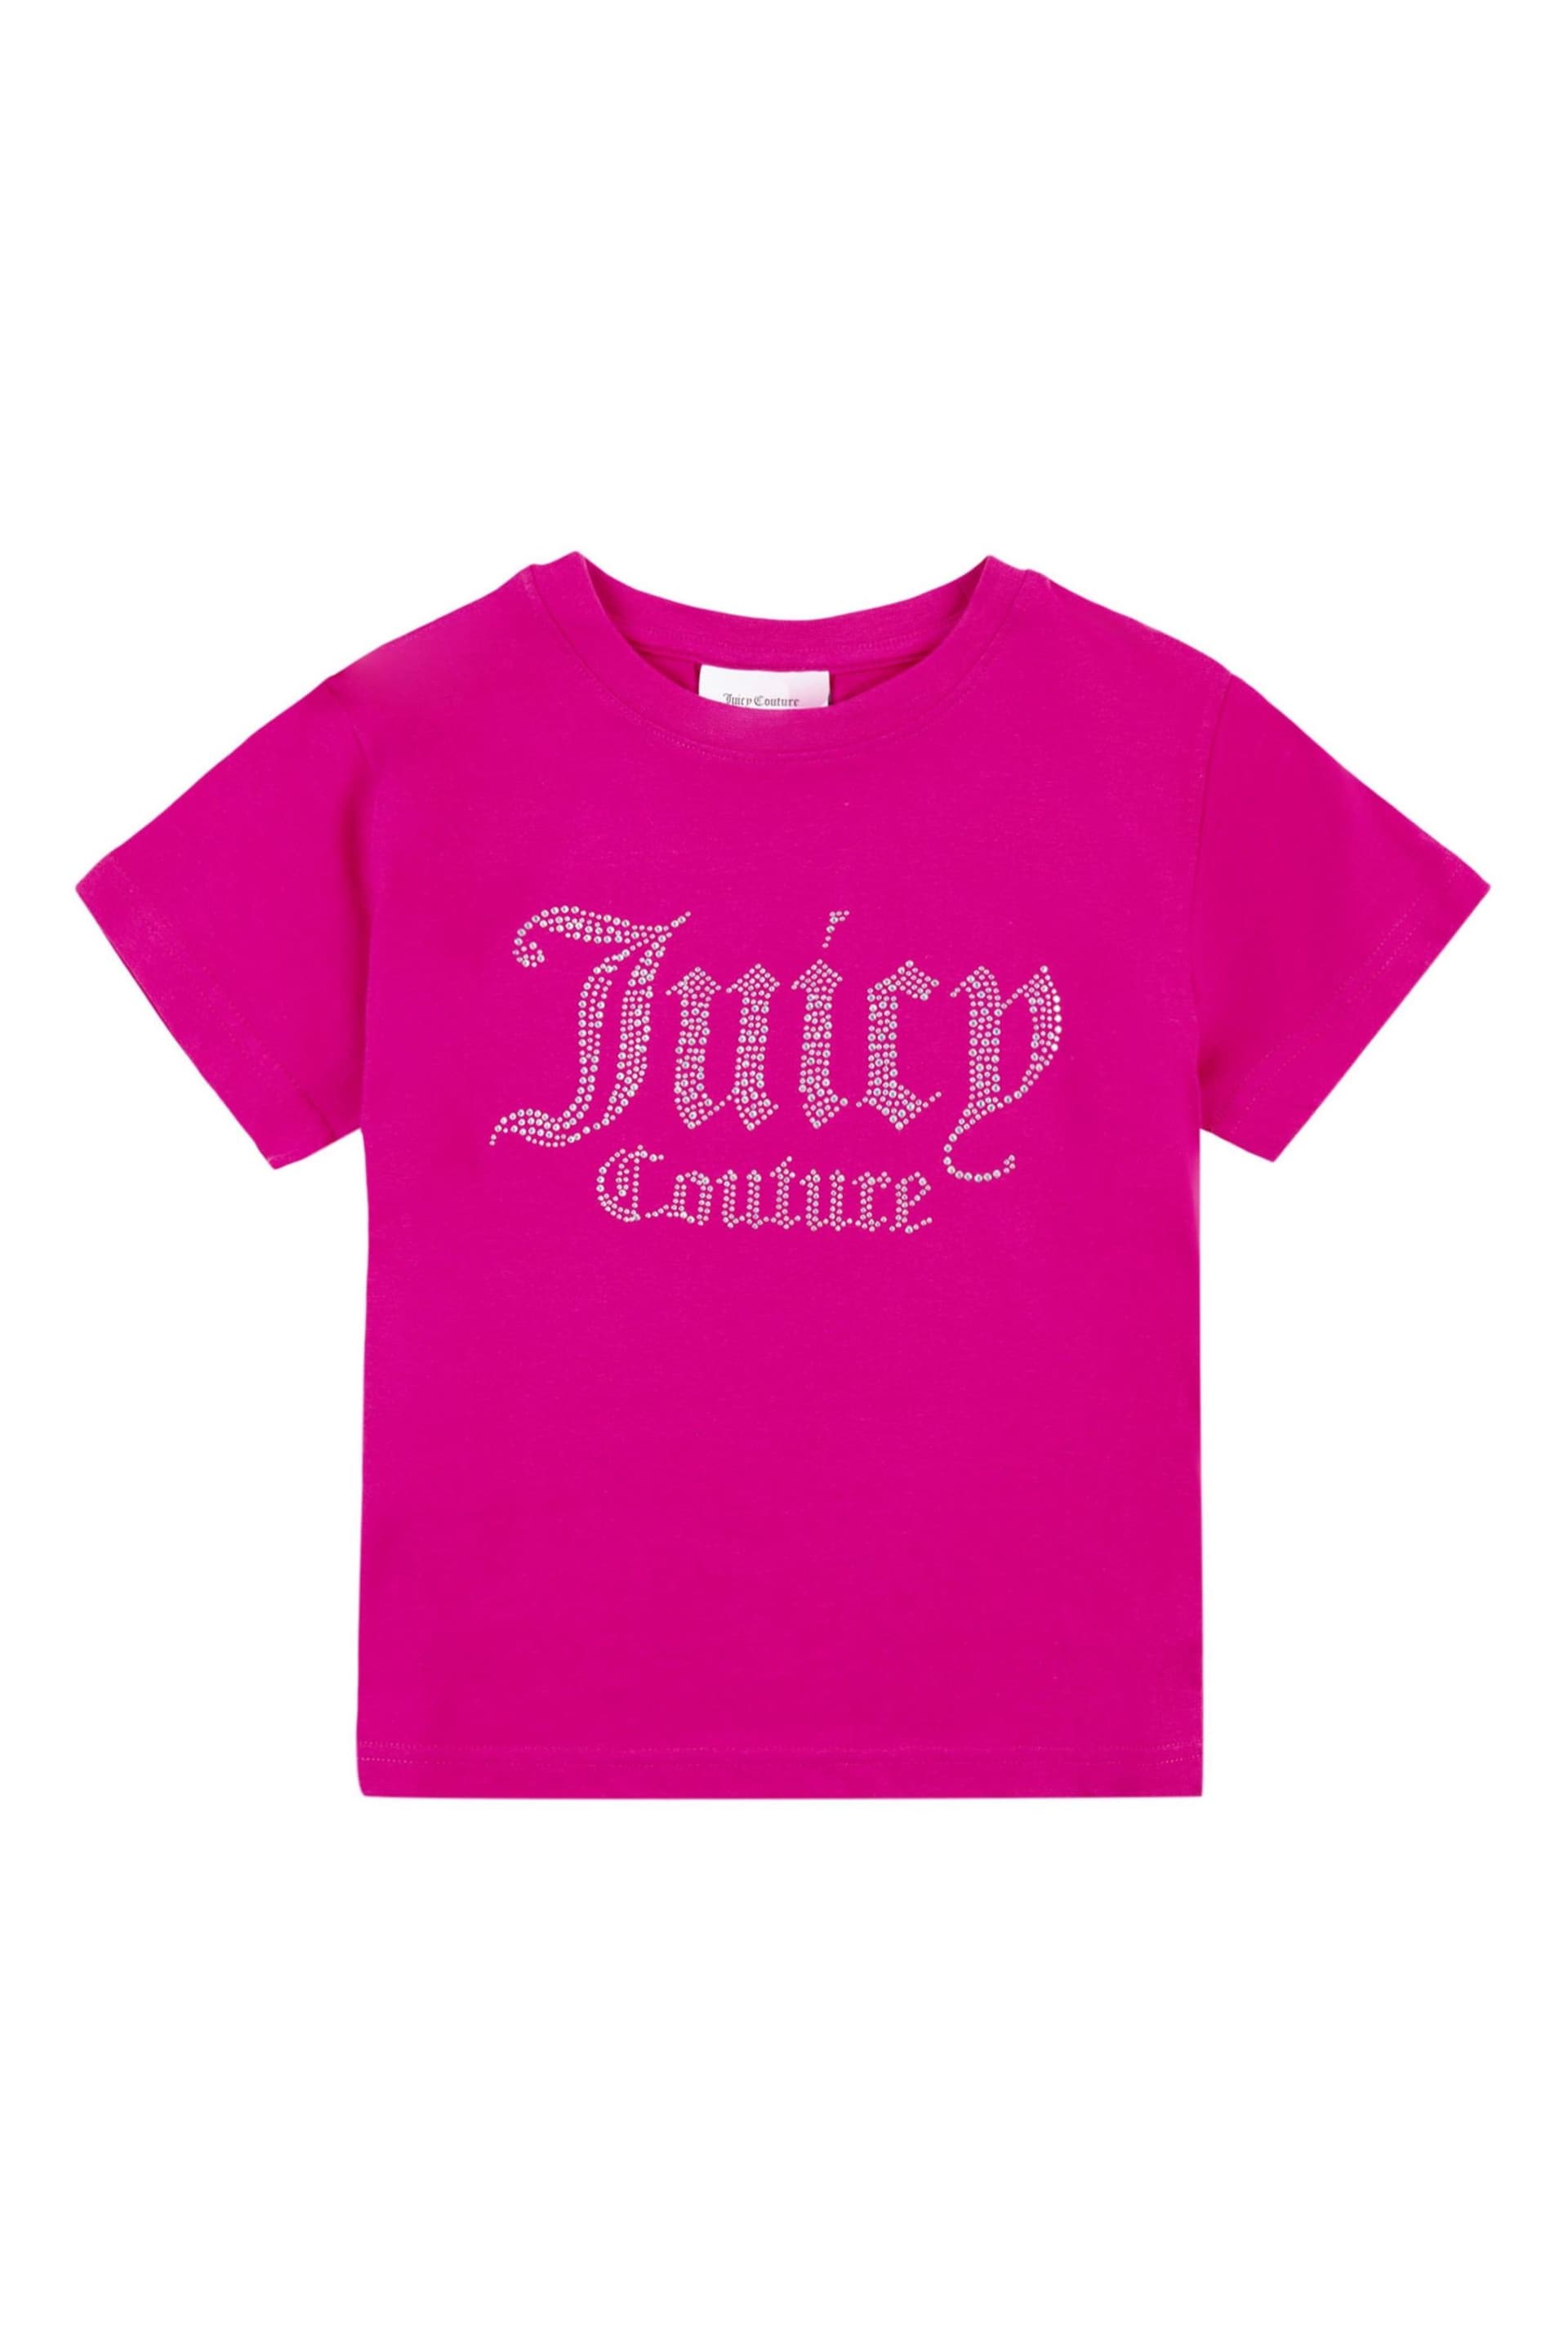 Juicy Couture Diamante Short Sleeve T-Shirt - Image 1 of 3